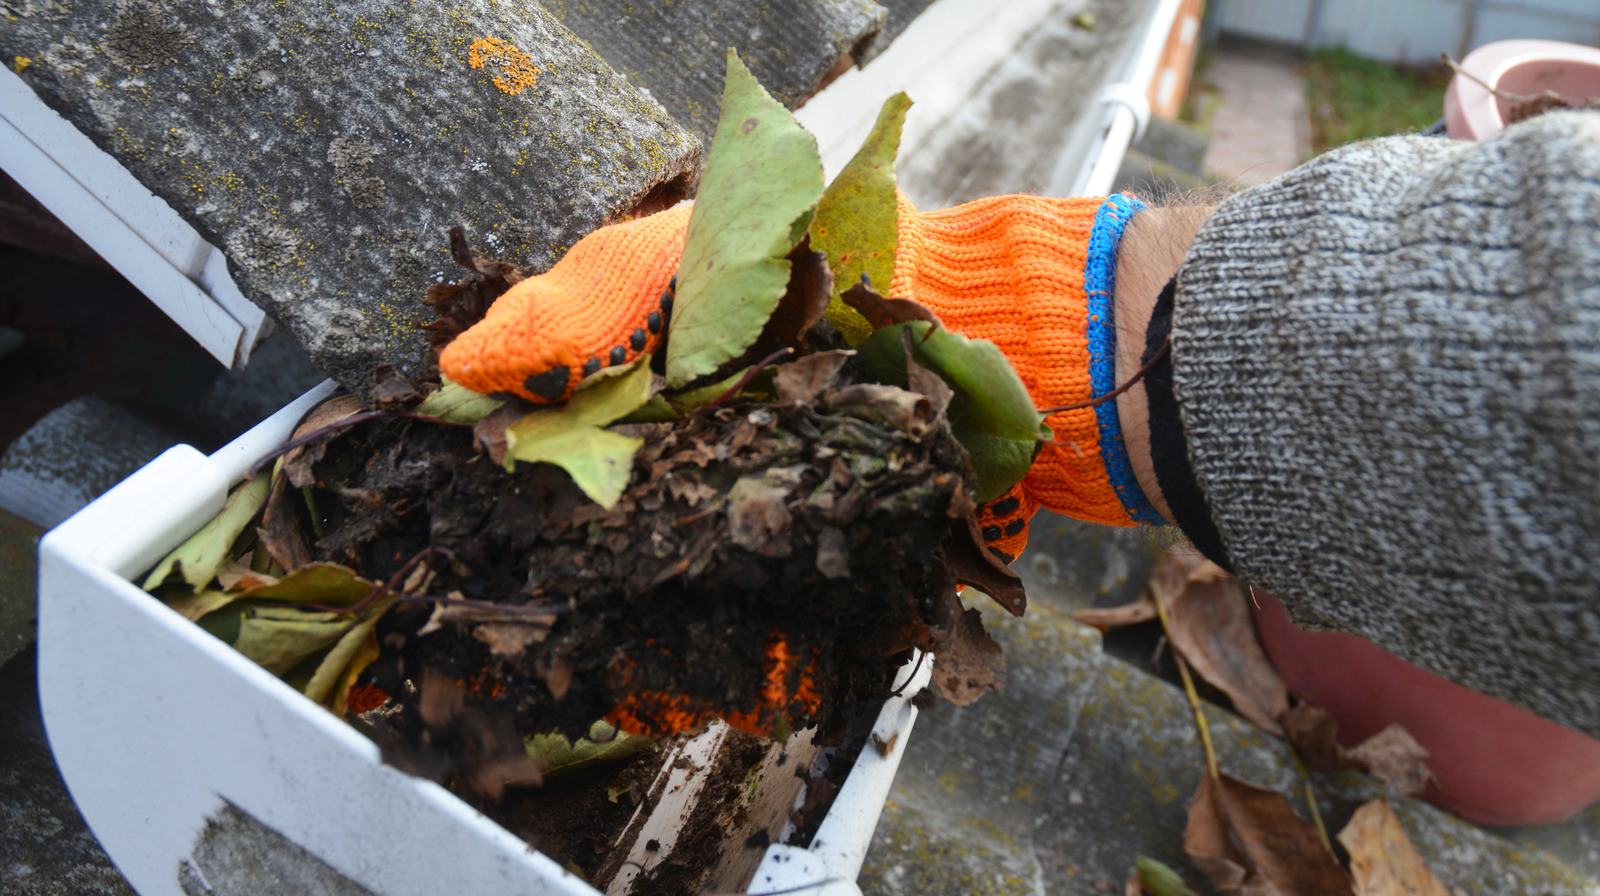 How To Clean Your Gutters To Make Them Last, According To An Expert